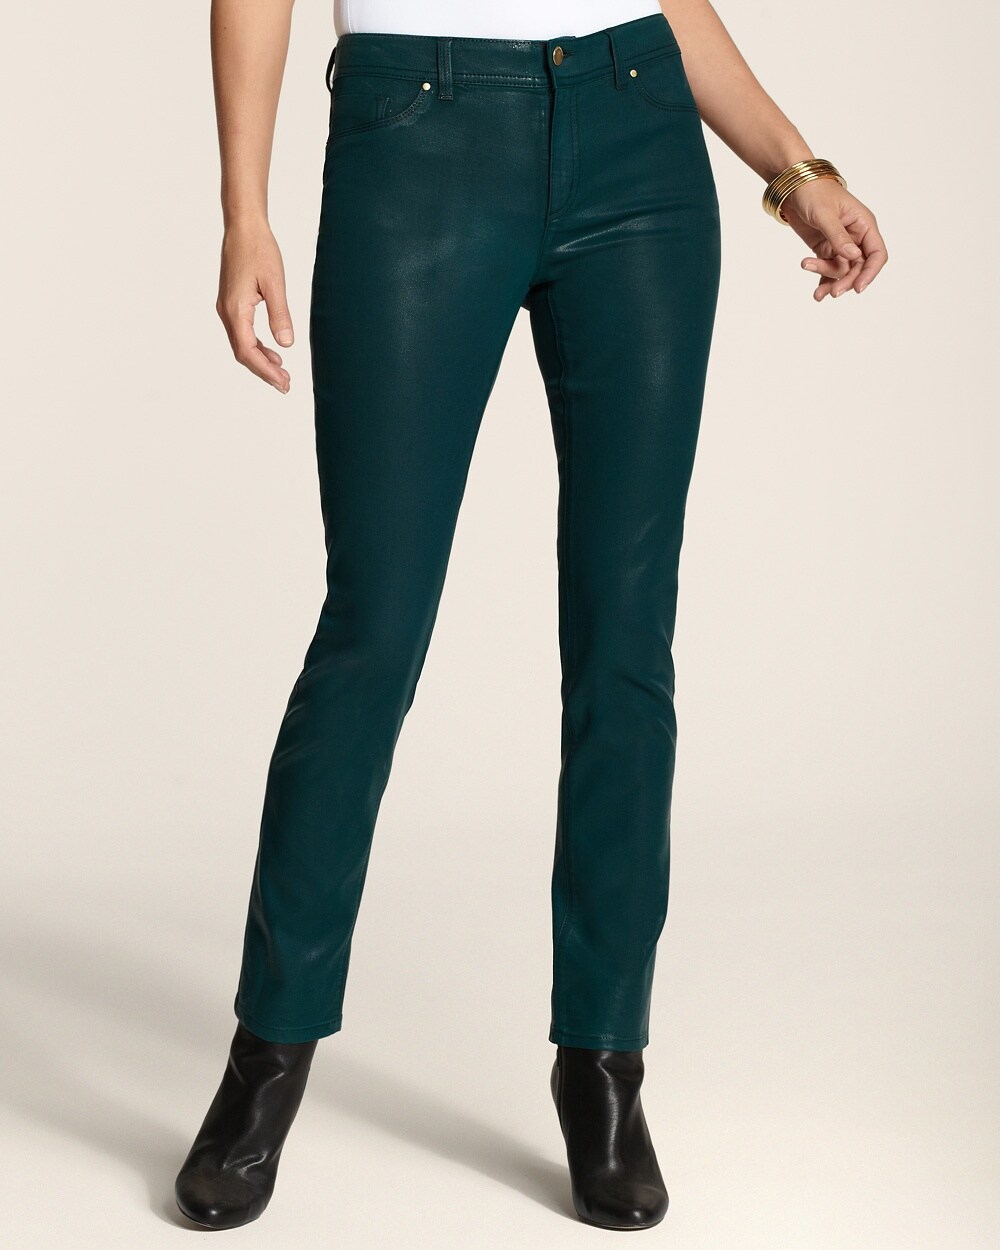 green coated jeans